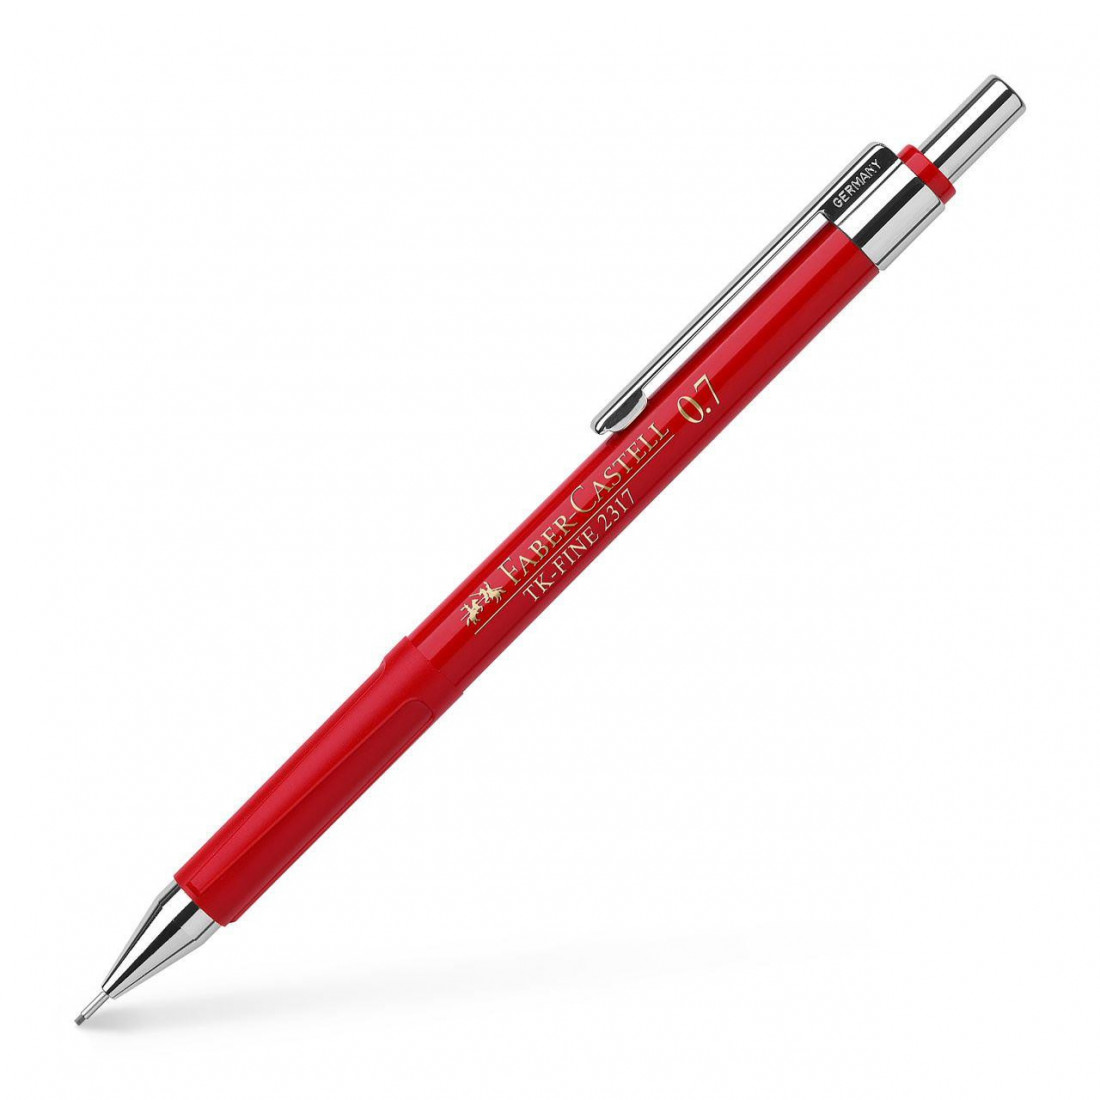 Faber Castell TK Fine 2317 mechanical pencil, 0.7 mm red